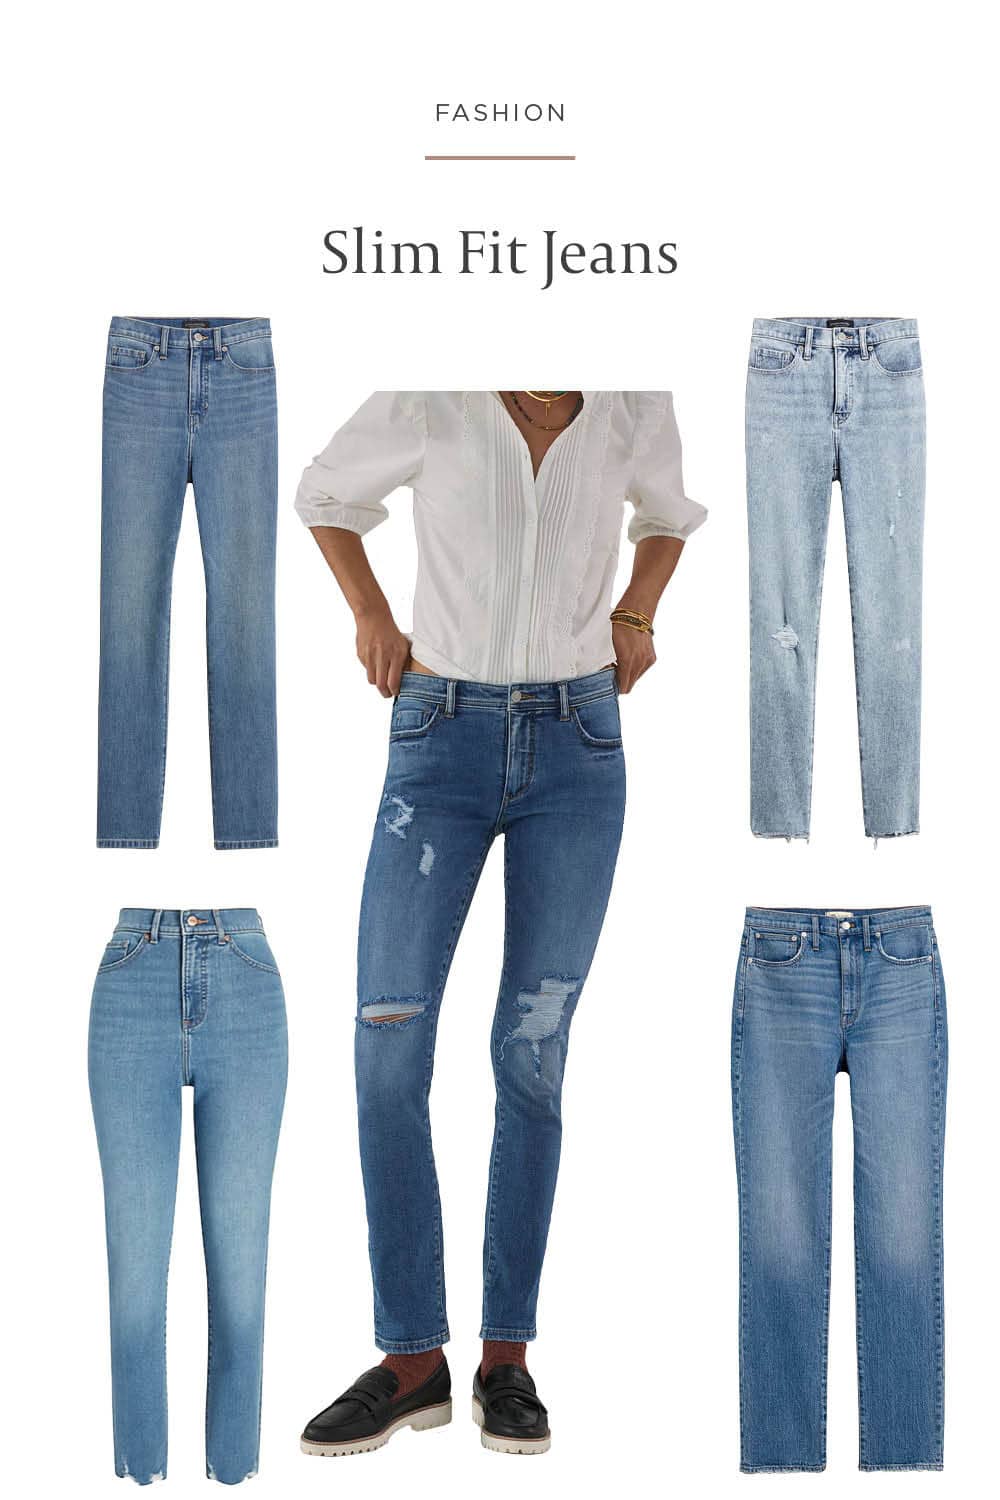 Replace Your Skinny Jeans With A Slim Fit Jean